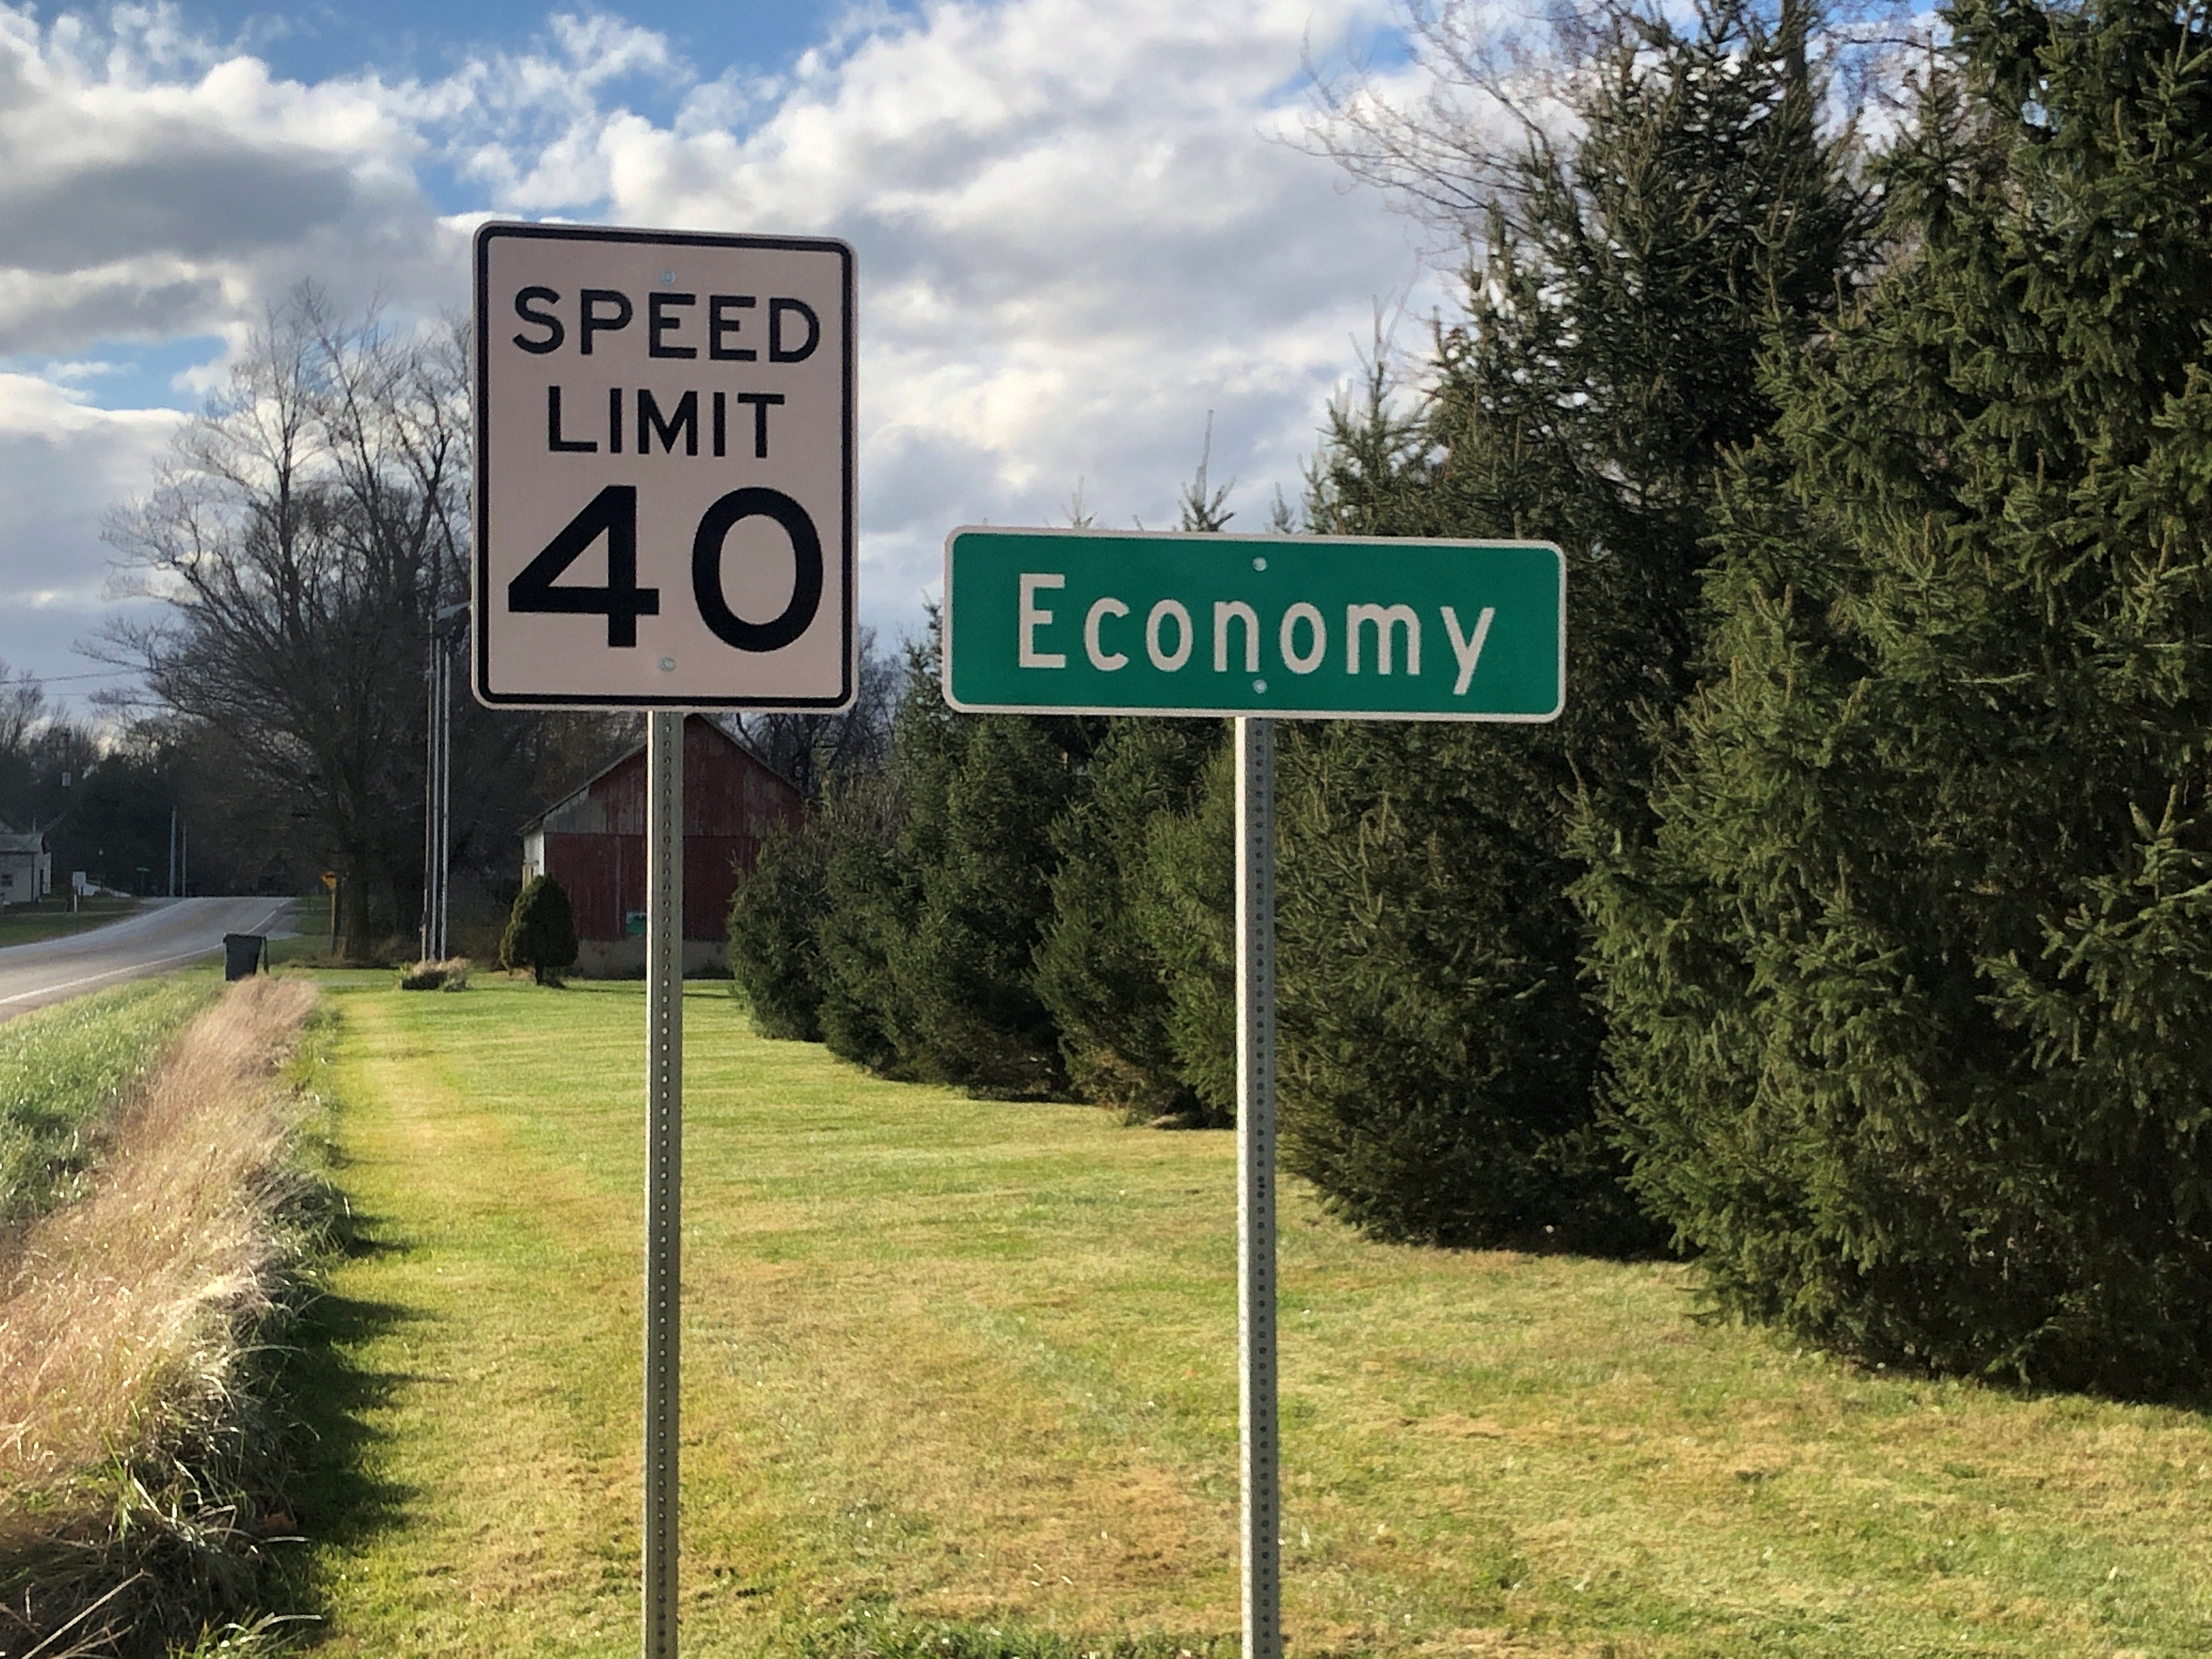 A speed limit sign is seen beside a city sign for Economy, Indiana, U.S., November 10, 2020. REUTERS/Timothy Aeppel